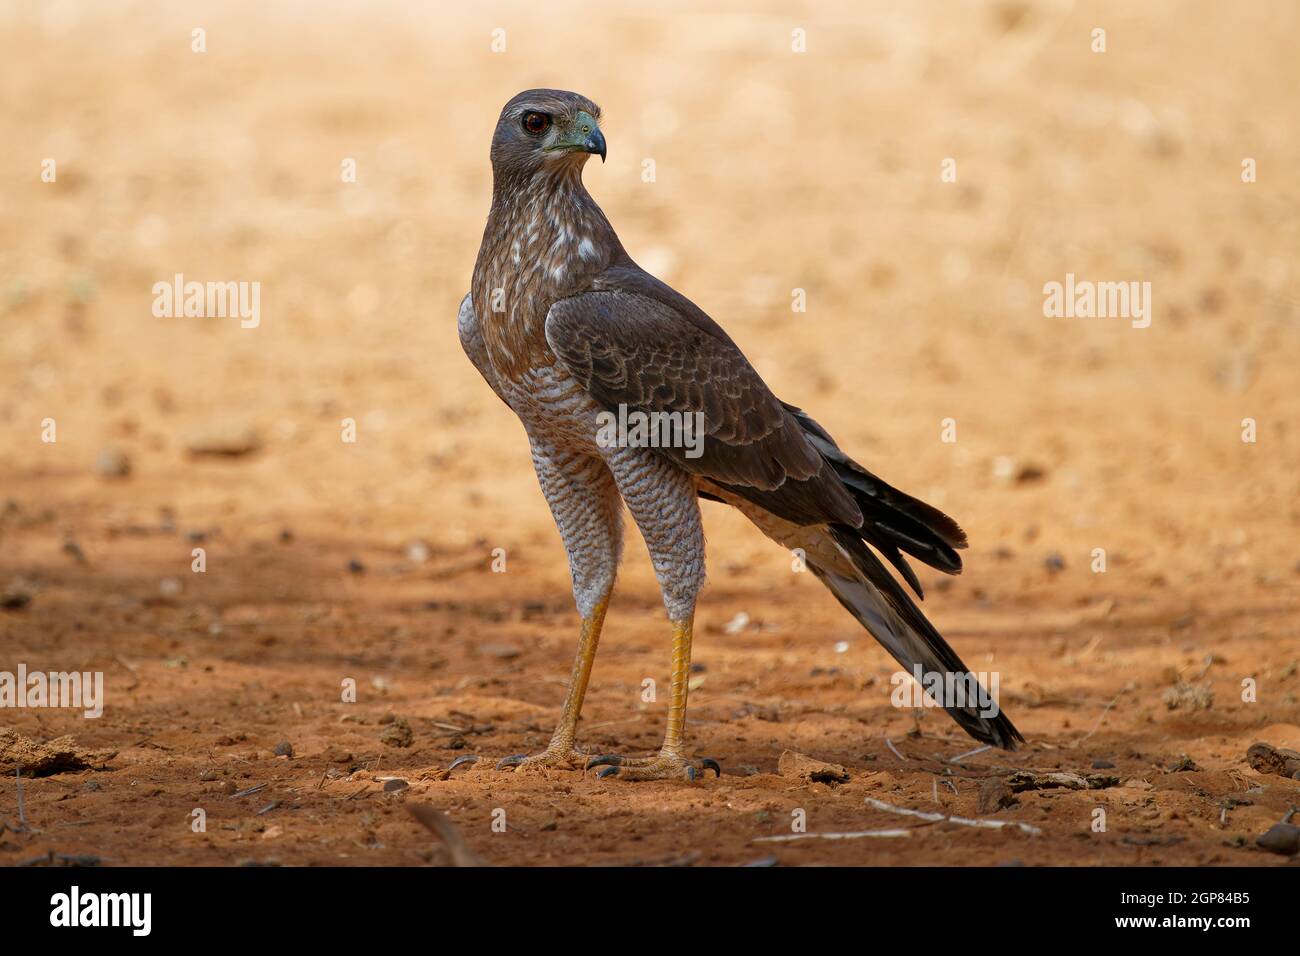 Dark Chanting-goshawk - Melierax metabates grey bird of prey in Accipitridae, found across sub-Saharan Africa and southern Arabia, standing on the des Stock Photo